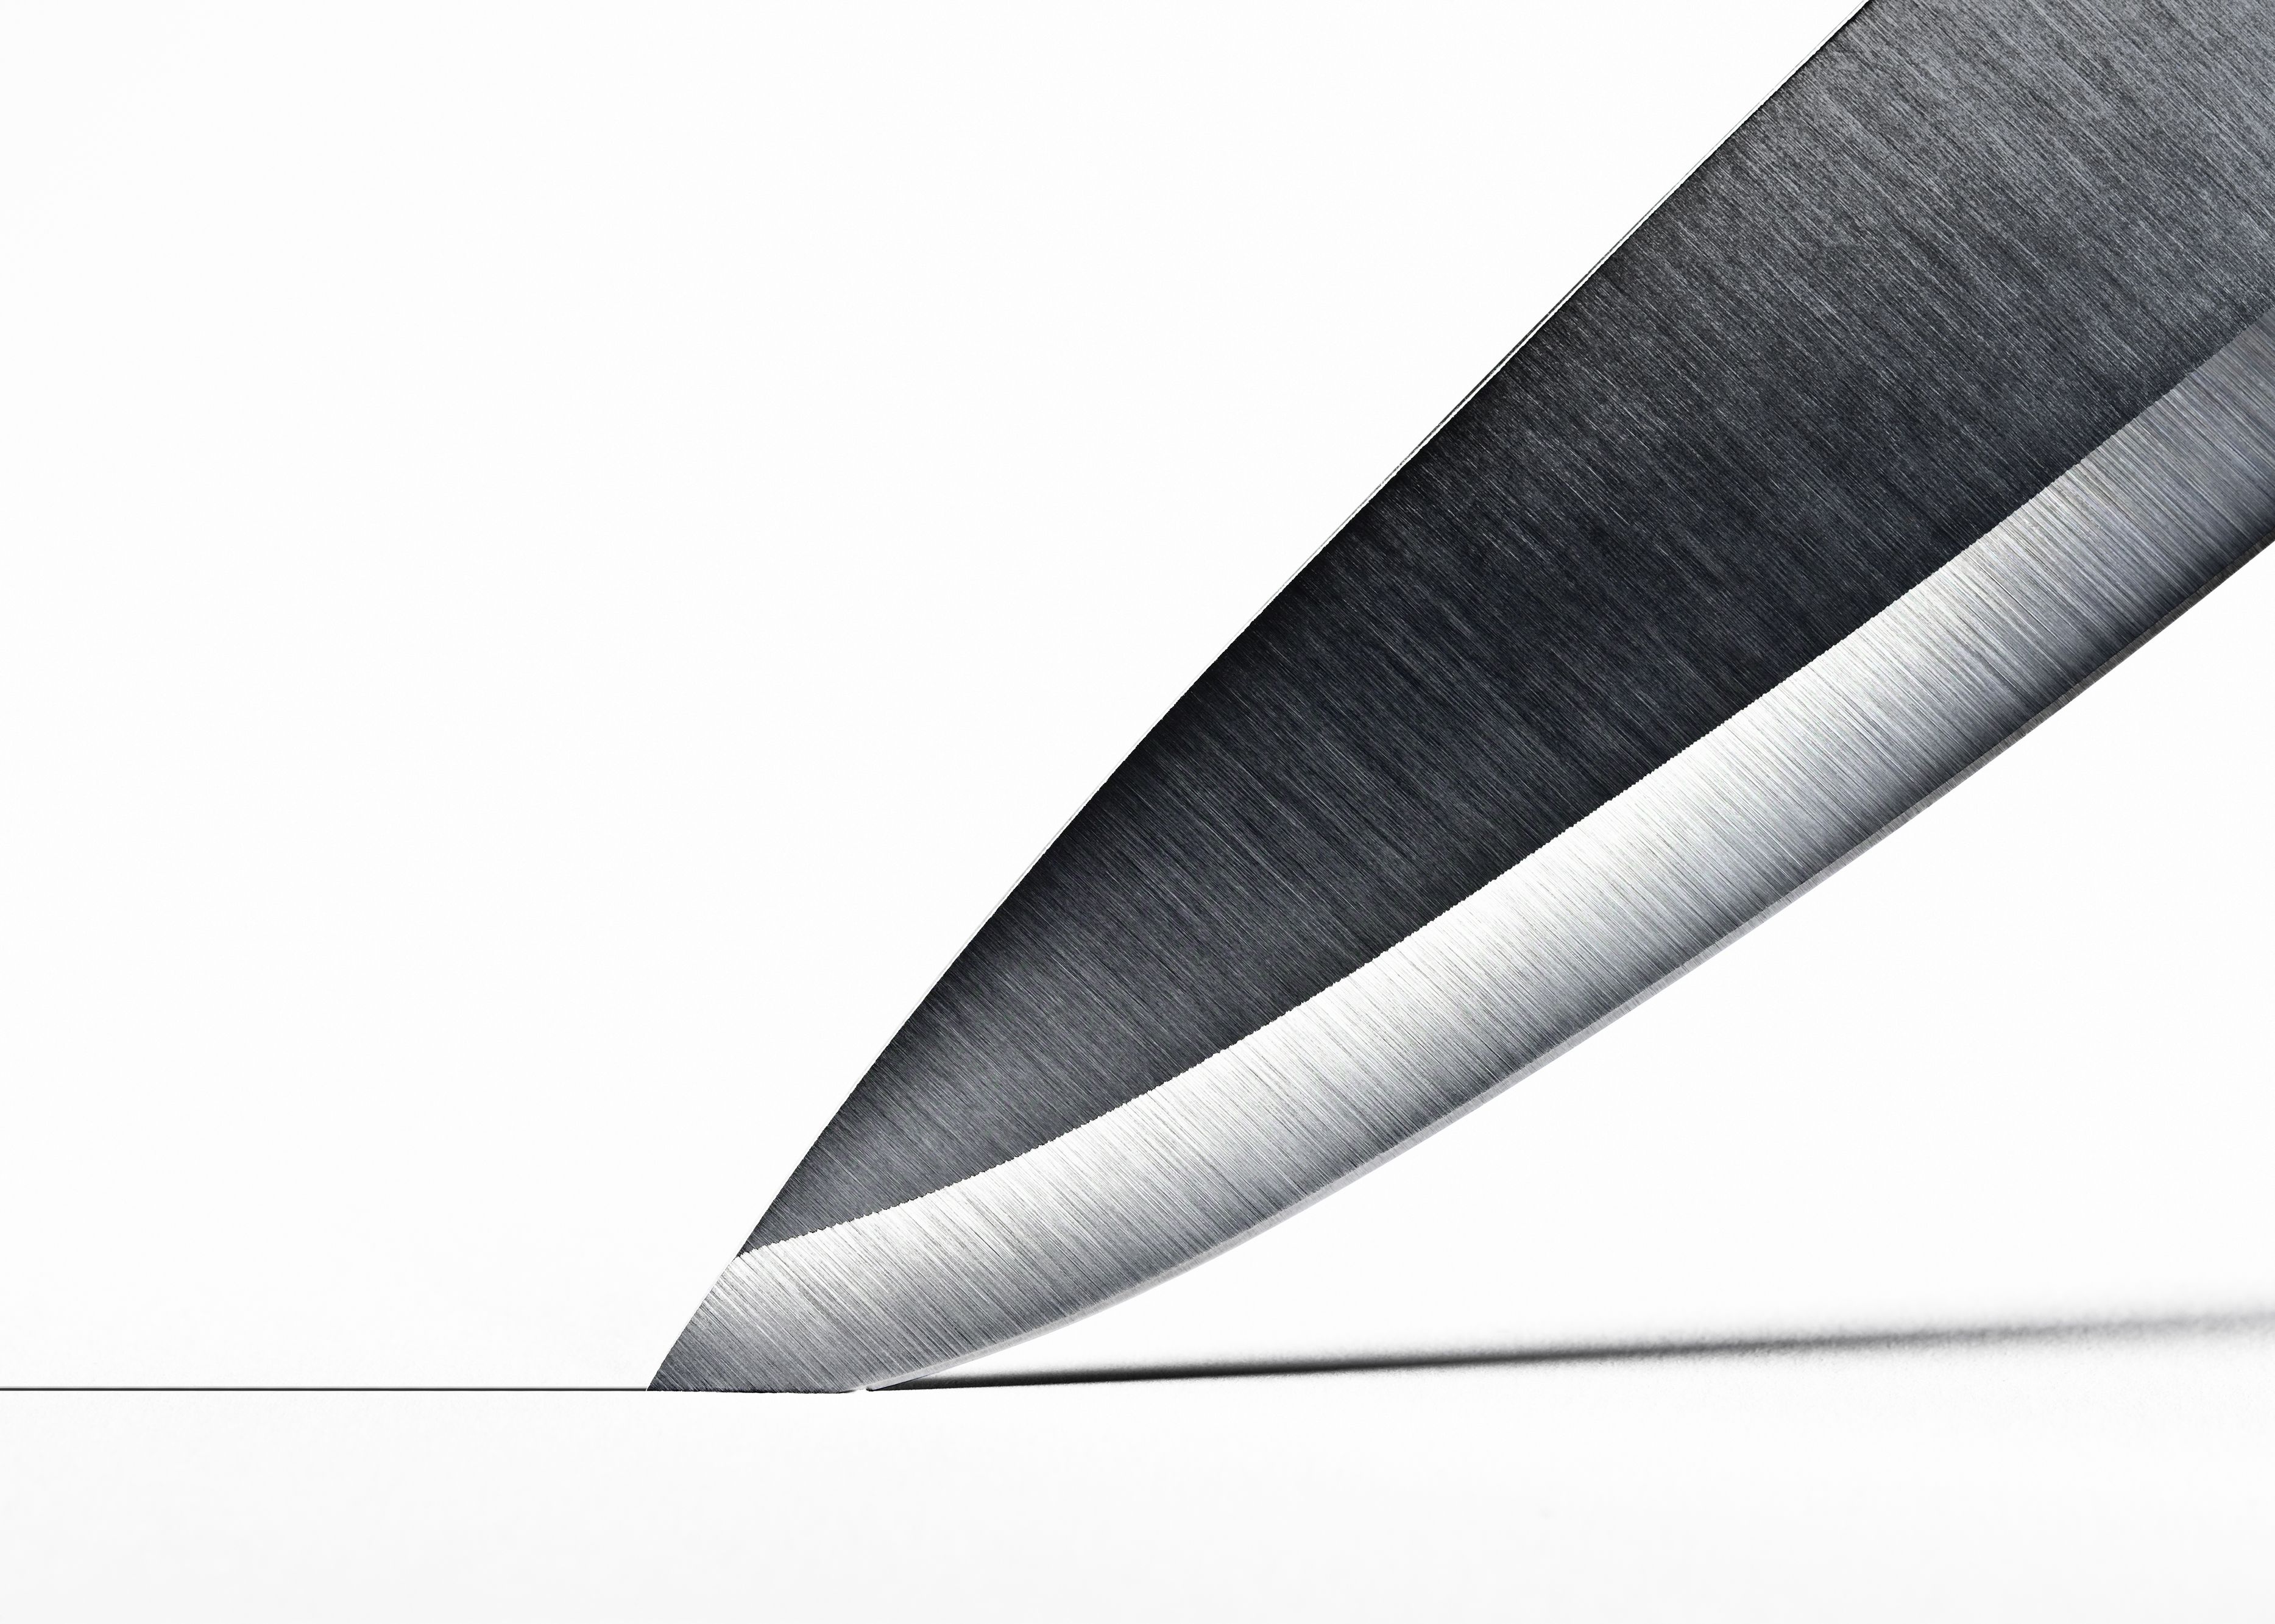 https://hips.hearstapps.com/hmg-prod/images/steel-knife-blade-cutting-into-surface-high-res-stock-photography-84428308-1540401323.jpg